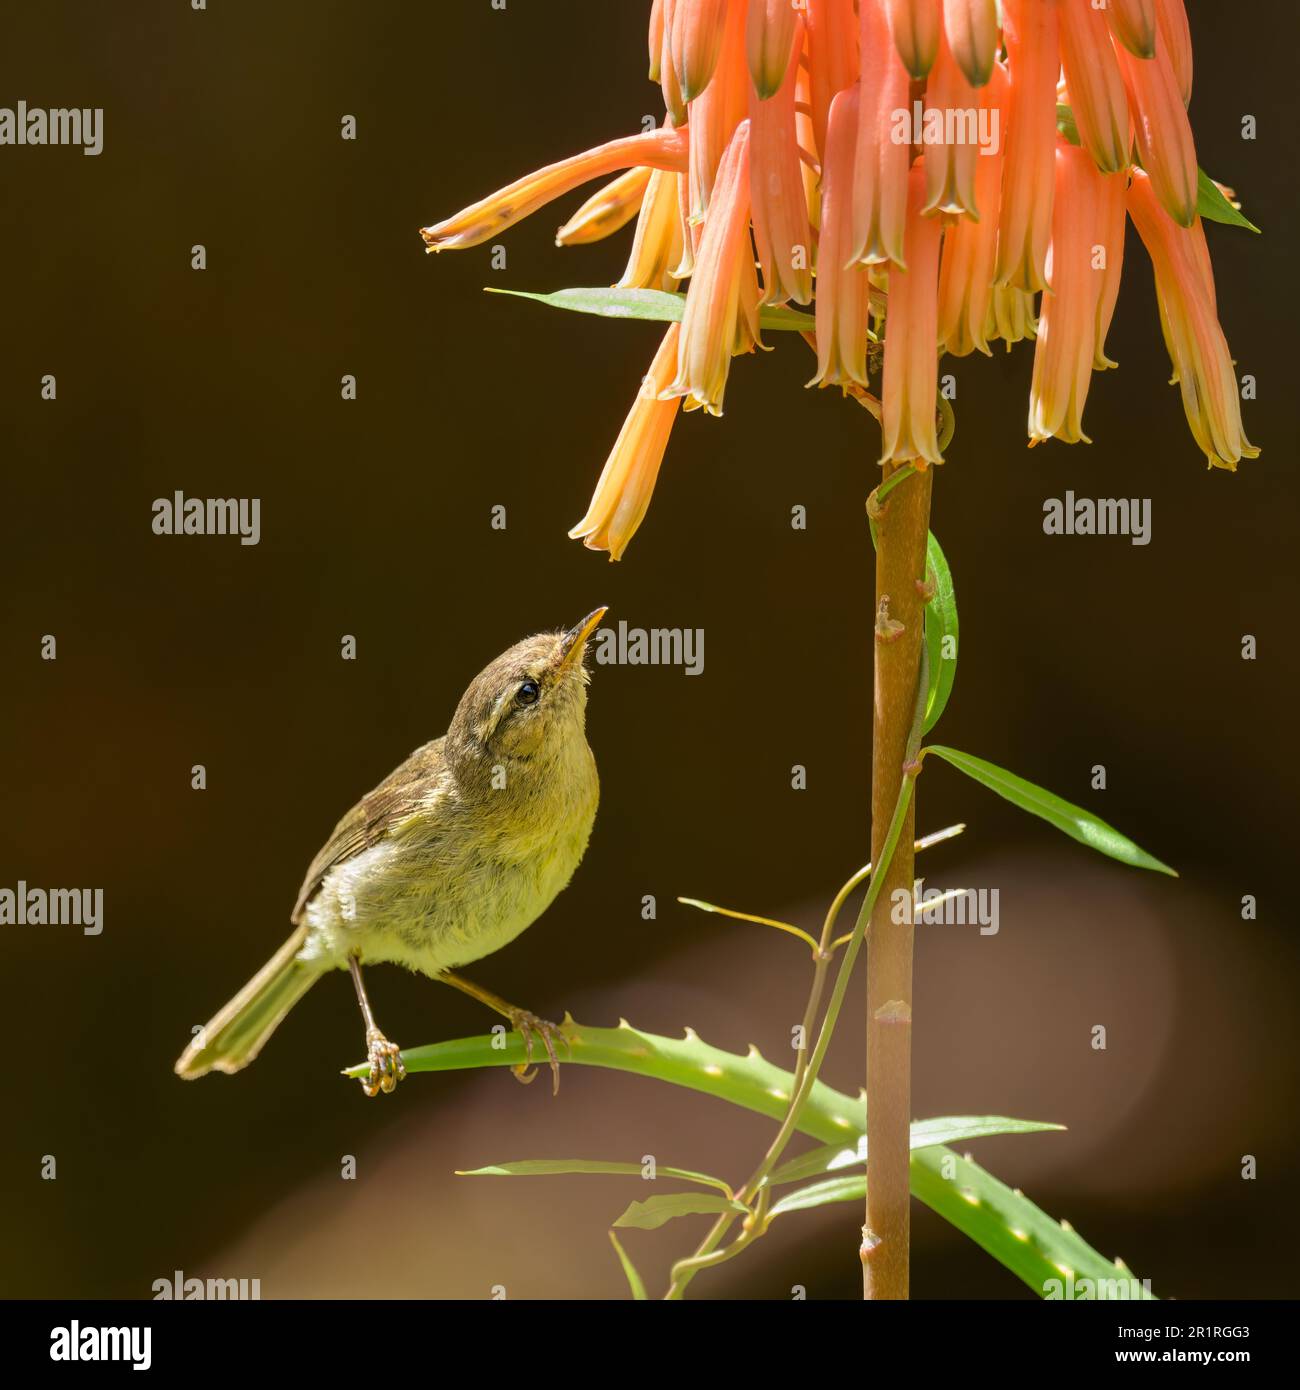 Canary Islands chiffchaff, Phylloscopus canariensis, a leaf warbler endemic to the Canary Islands, perching on a flowering Aloe plant, Gran Canaria Stock Photo